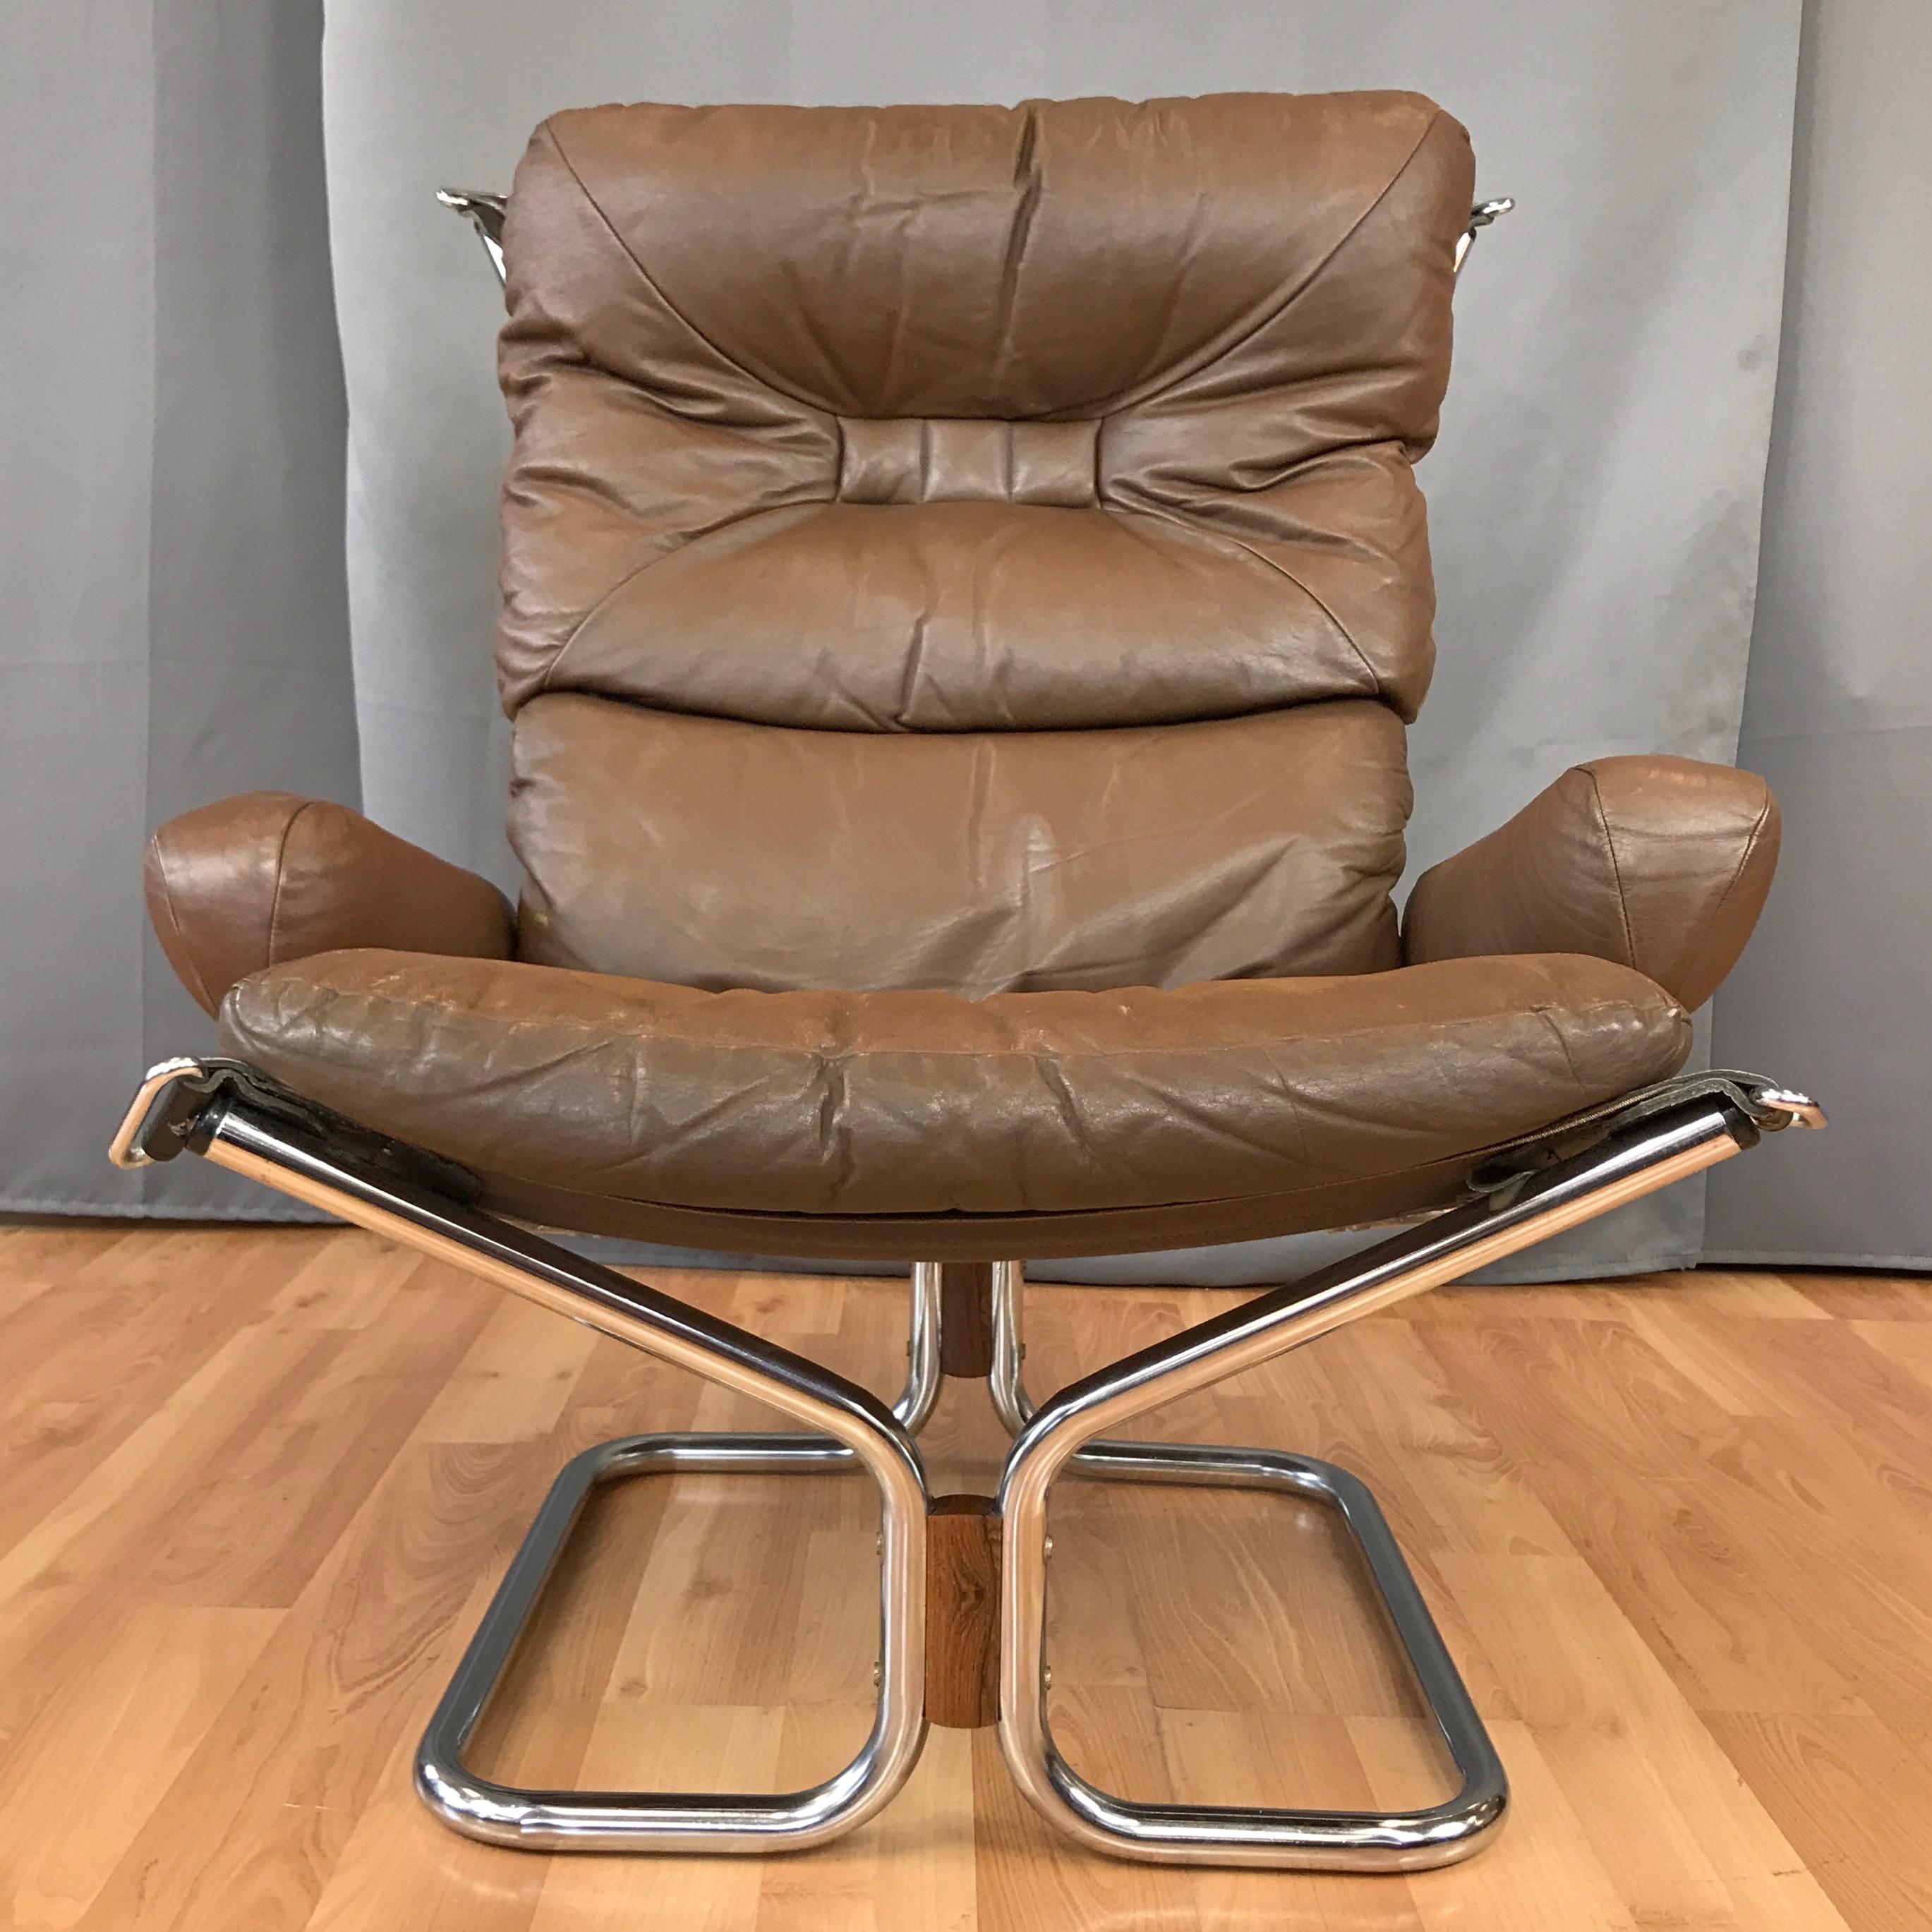 A 1970s leather and chrome “Wing” lounge chair by Harald Relling for Westnofa Furniture.

Supremely comfortable low-slung seat with high back and padded arms. Original brown leather upholstery with distinctively detailed down-filled tufted